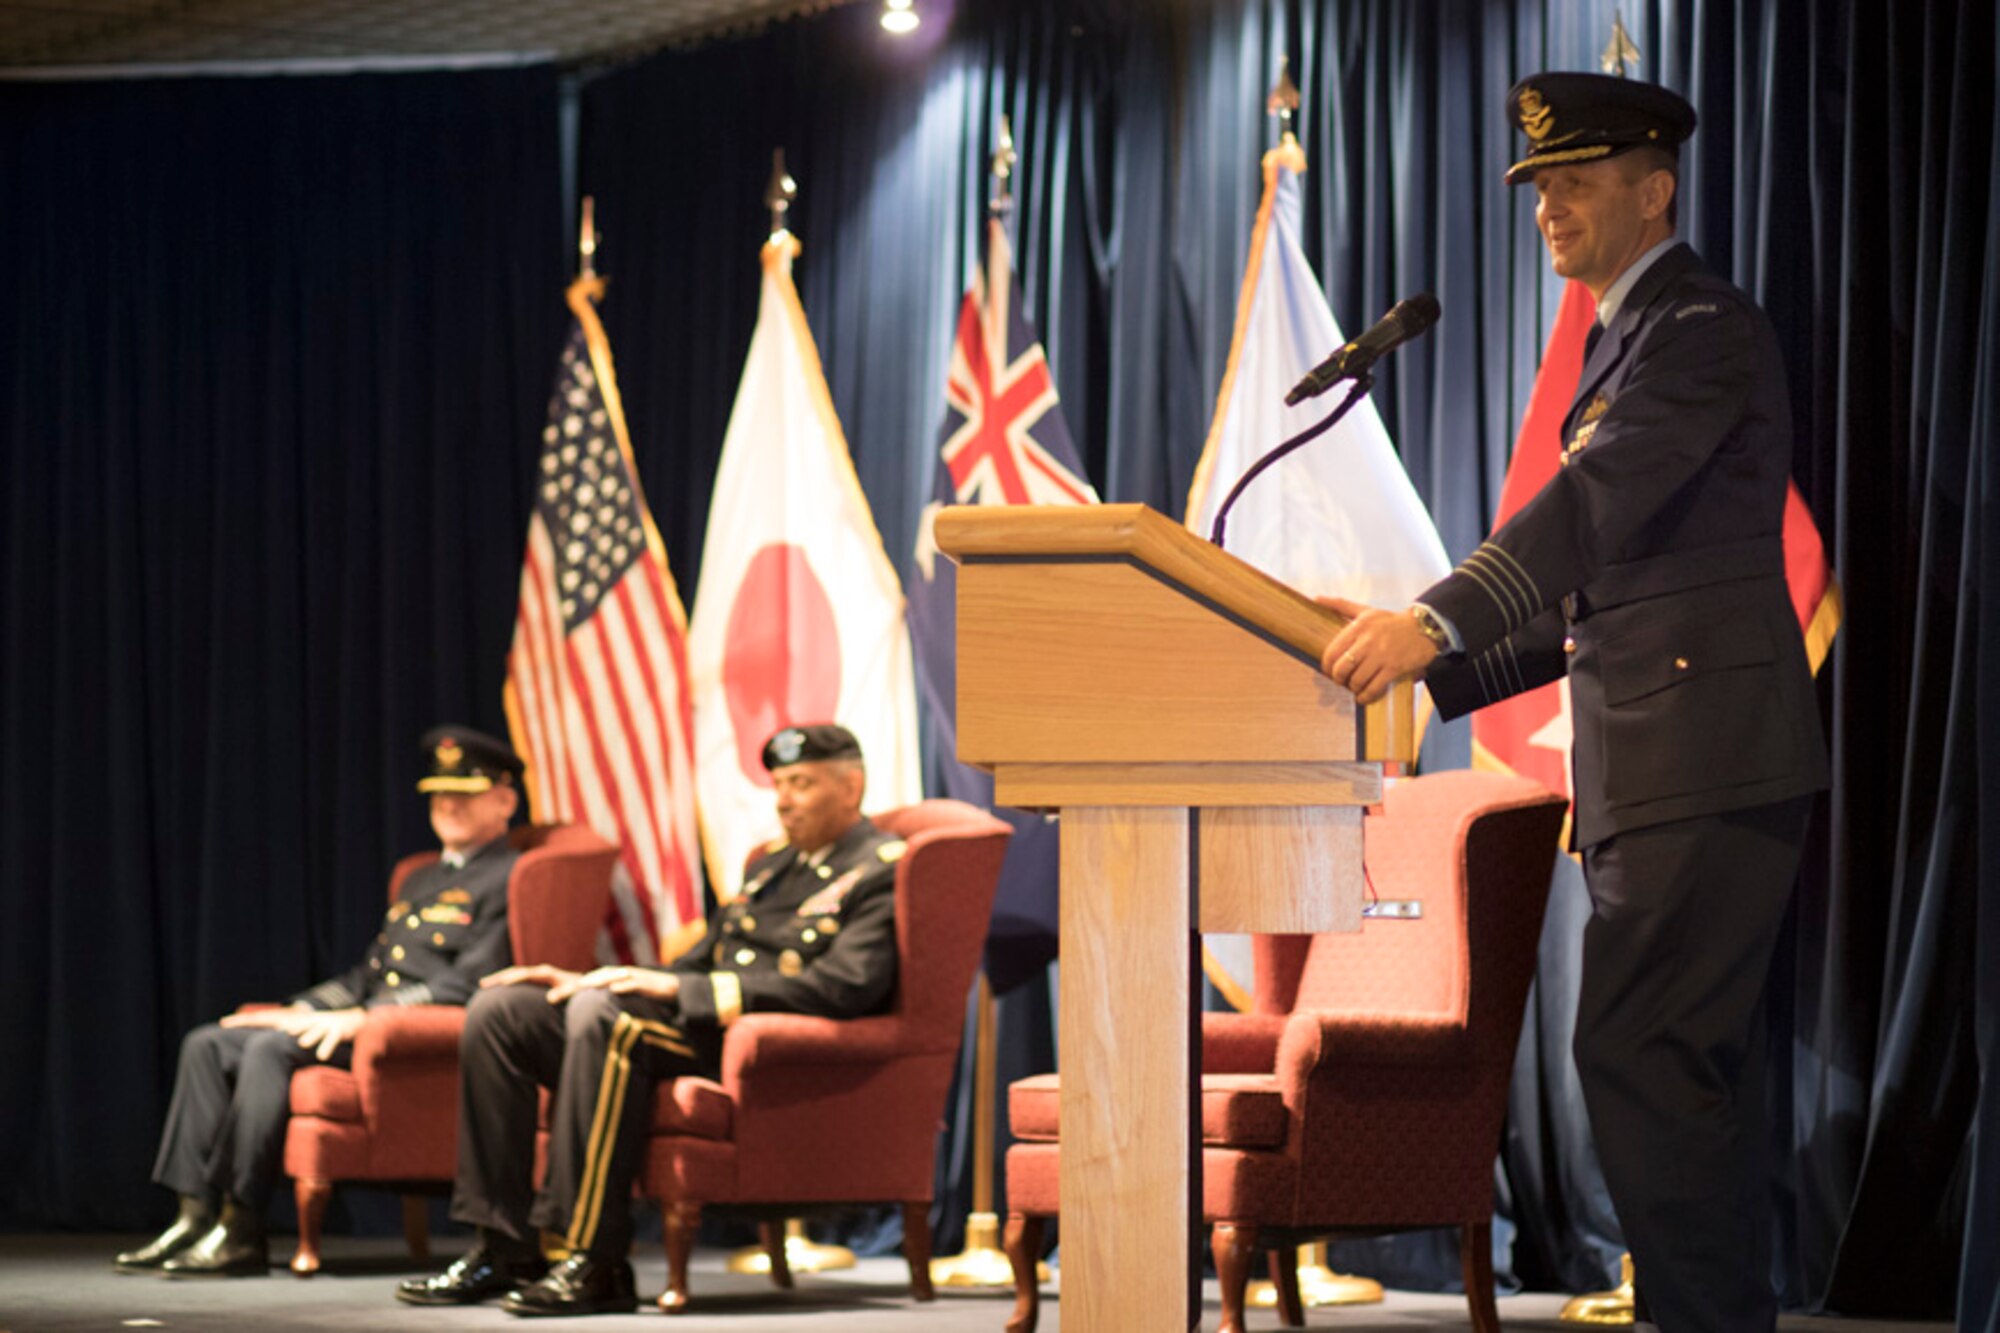 Royal Australian Air Force Group Captain Michael W. Jansen, outgoing United Nations Command (Rear) commander, gives his final speech during the UNC (Rear) change of command ceremony